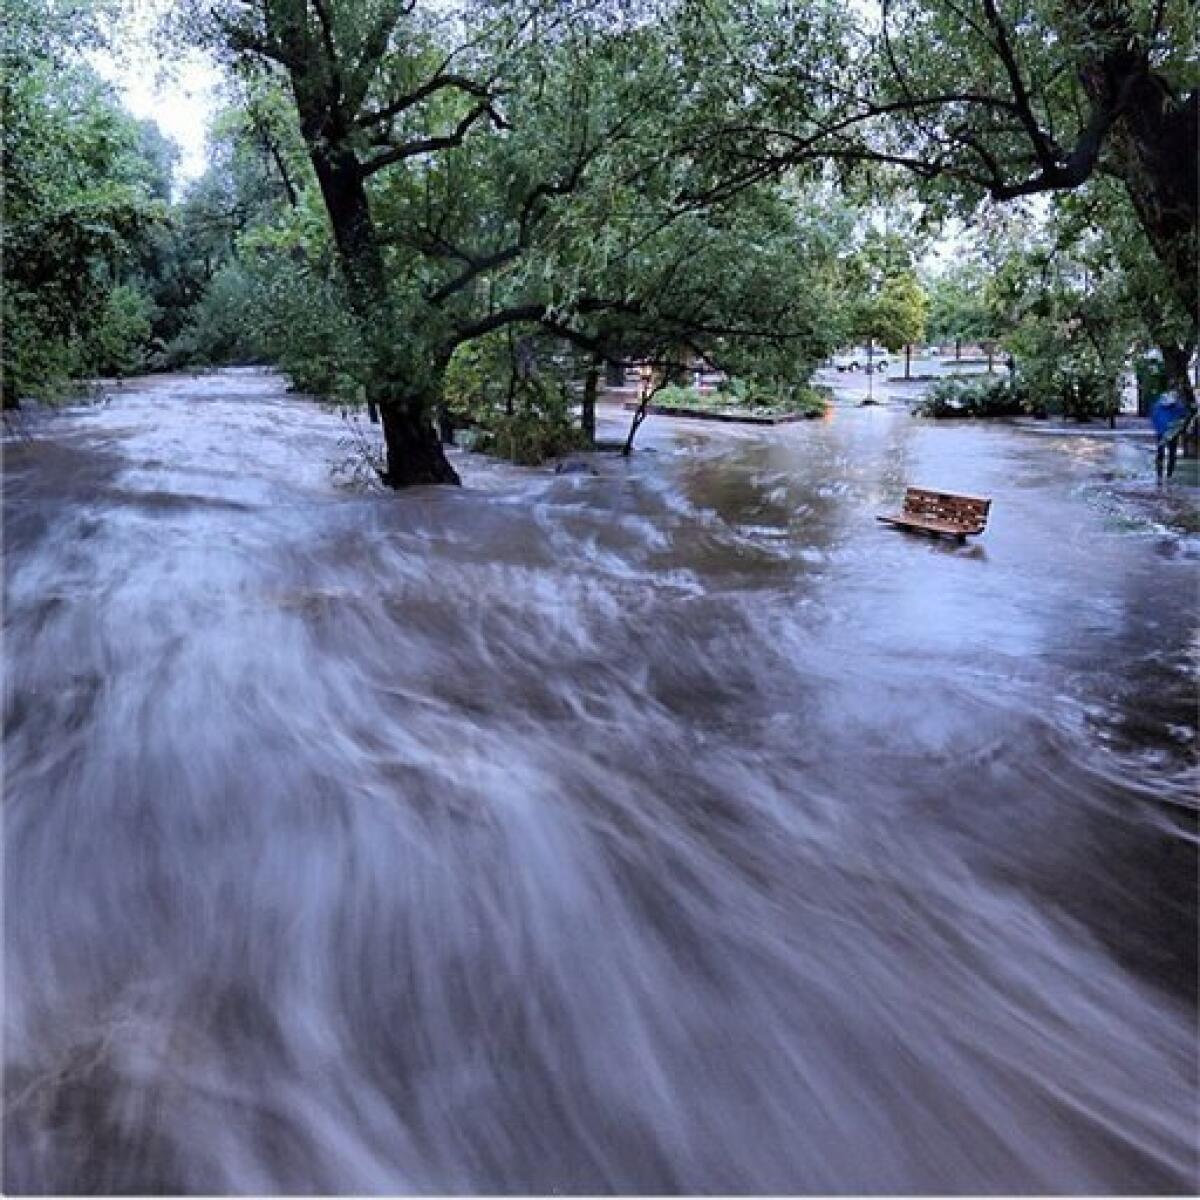 Flood waters course through a small park in Boulder, Colo., in this image made with a slow shutter speed.